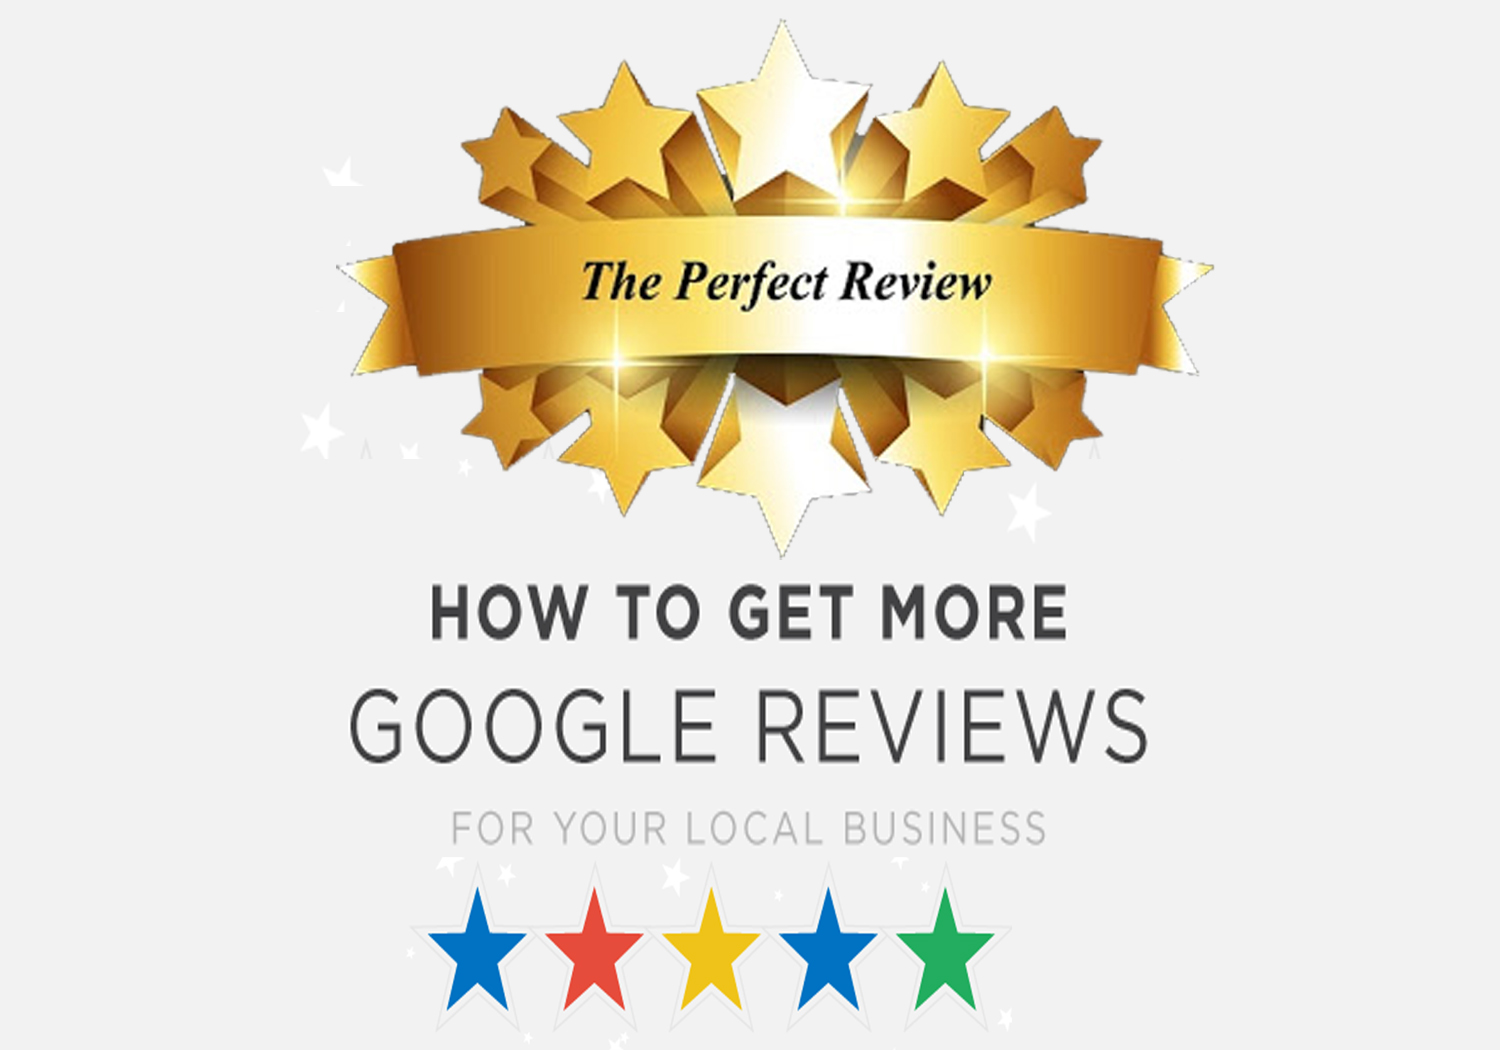 I will post 2 excellent USA Google reviews for your business